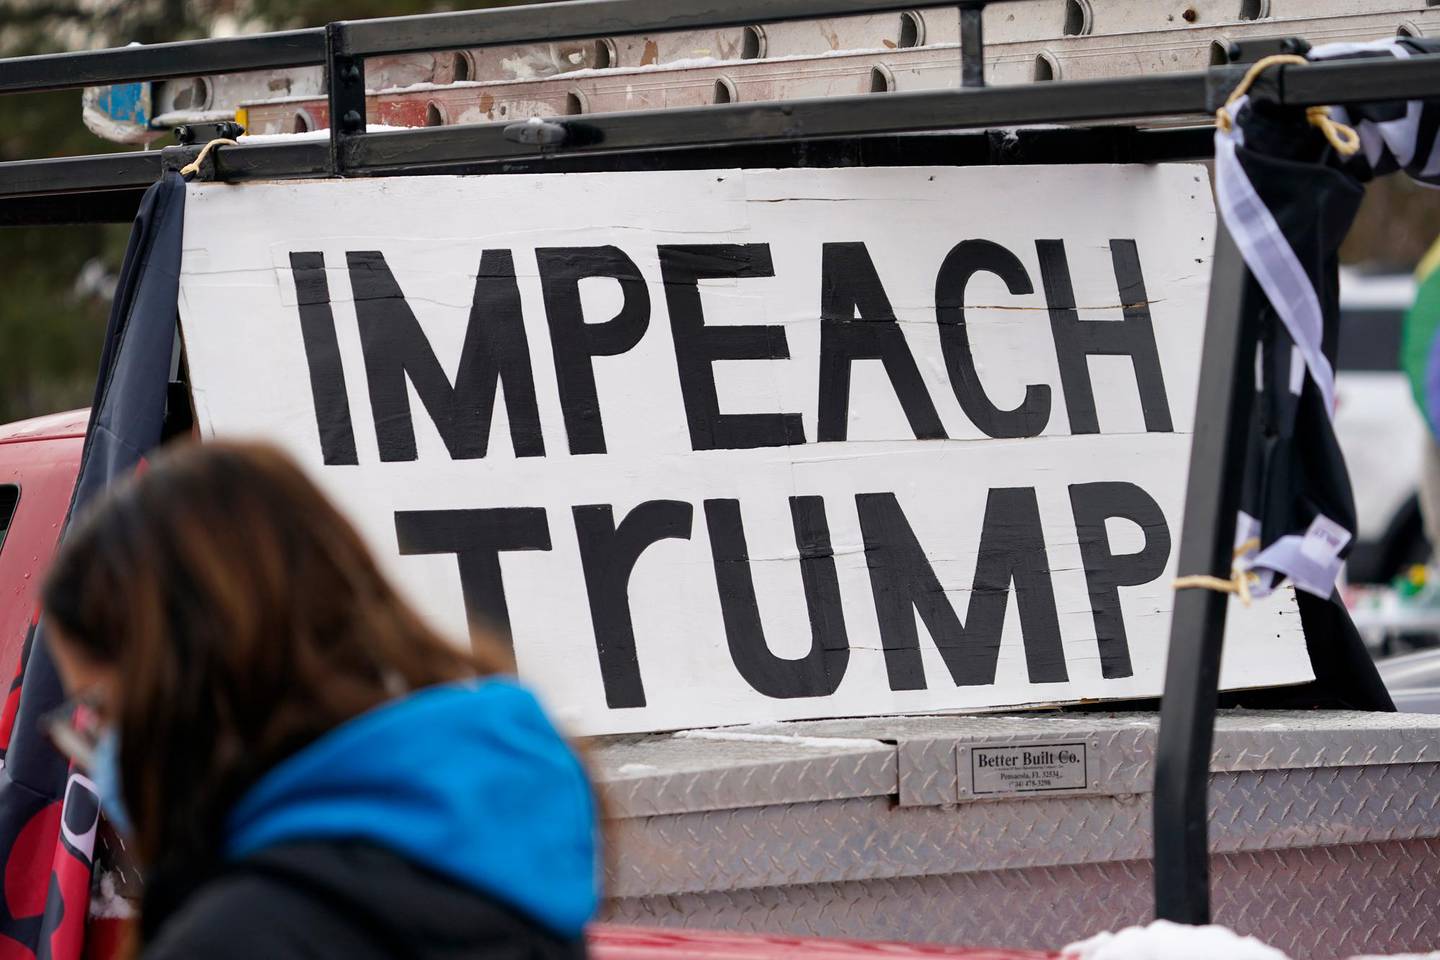 A sign stands in the bed of a pickup truck during a gathering calling for the impeachment of President Donald Trump at South High School before a car rally through the streets of downtown Sunday, Jan. 10, 2021, in Denver. More than 150 vehicles were guided by motorists calling for the removal from office of Trump as well as the resignations of Colorado Republican U.S. Representatives Lauren Boebert and Doug Lanborn for their support of Trump. (AP Photo/David Zalubowski)